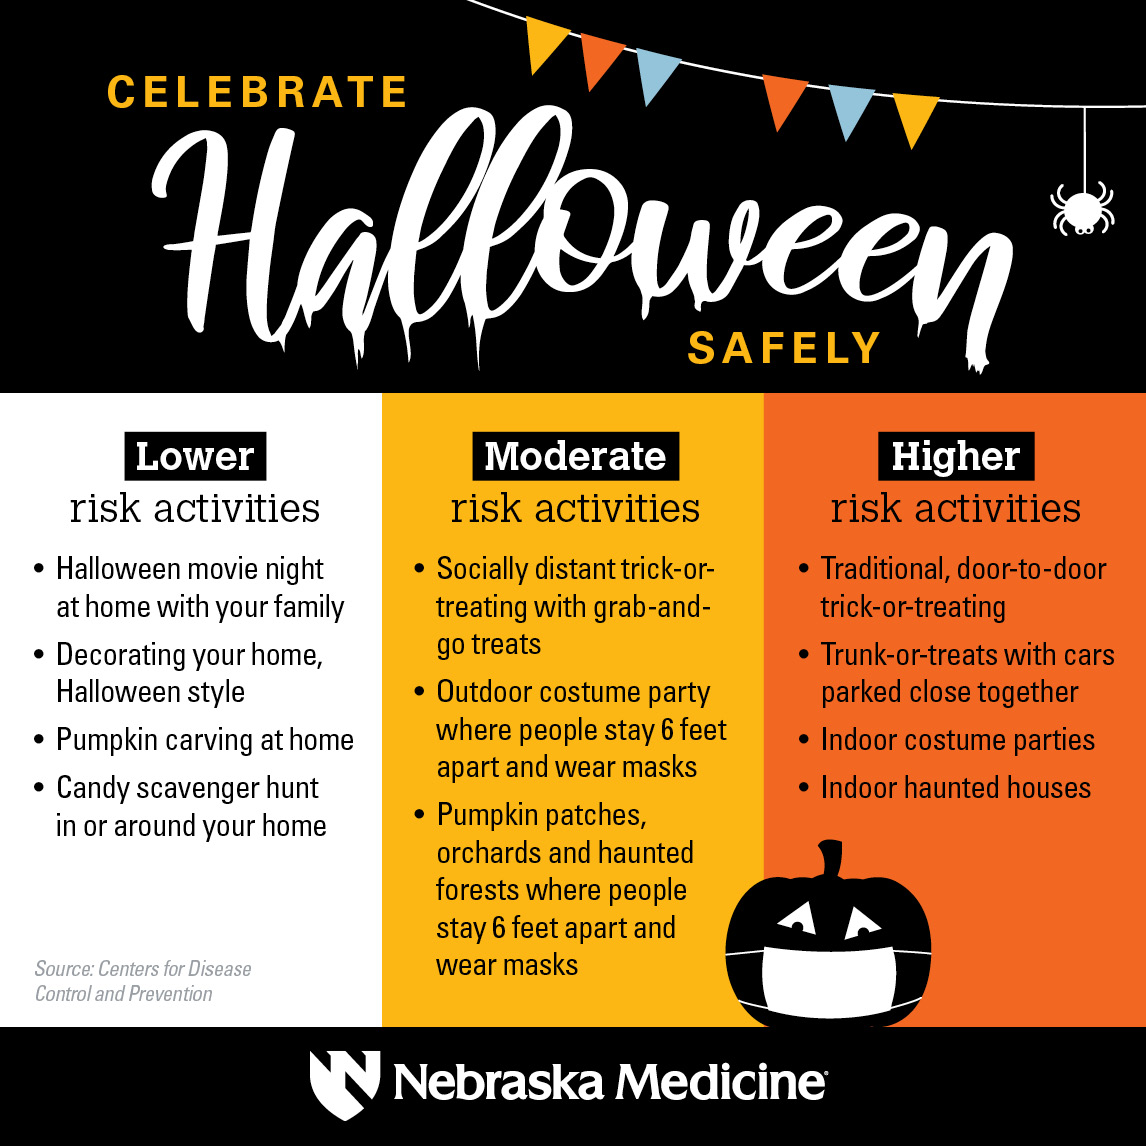 Trick-or-treating tips from an infectious diseases expert